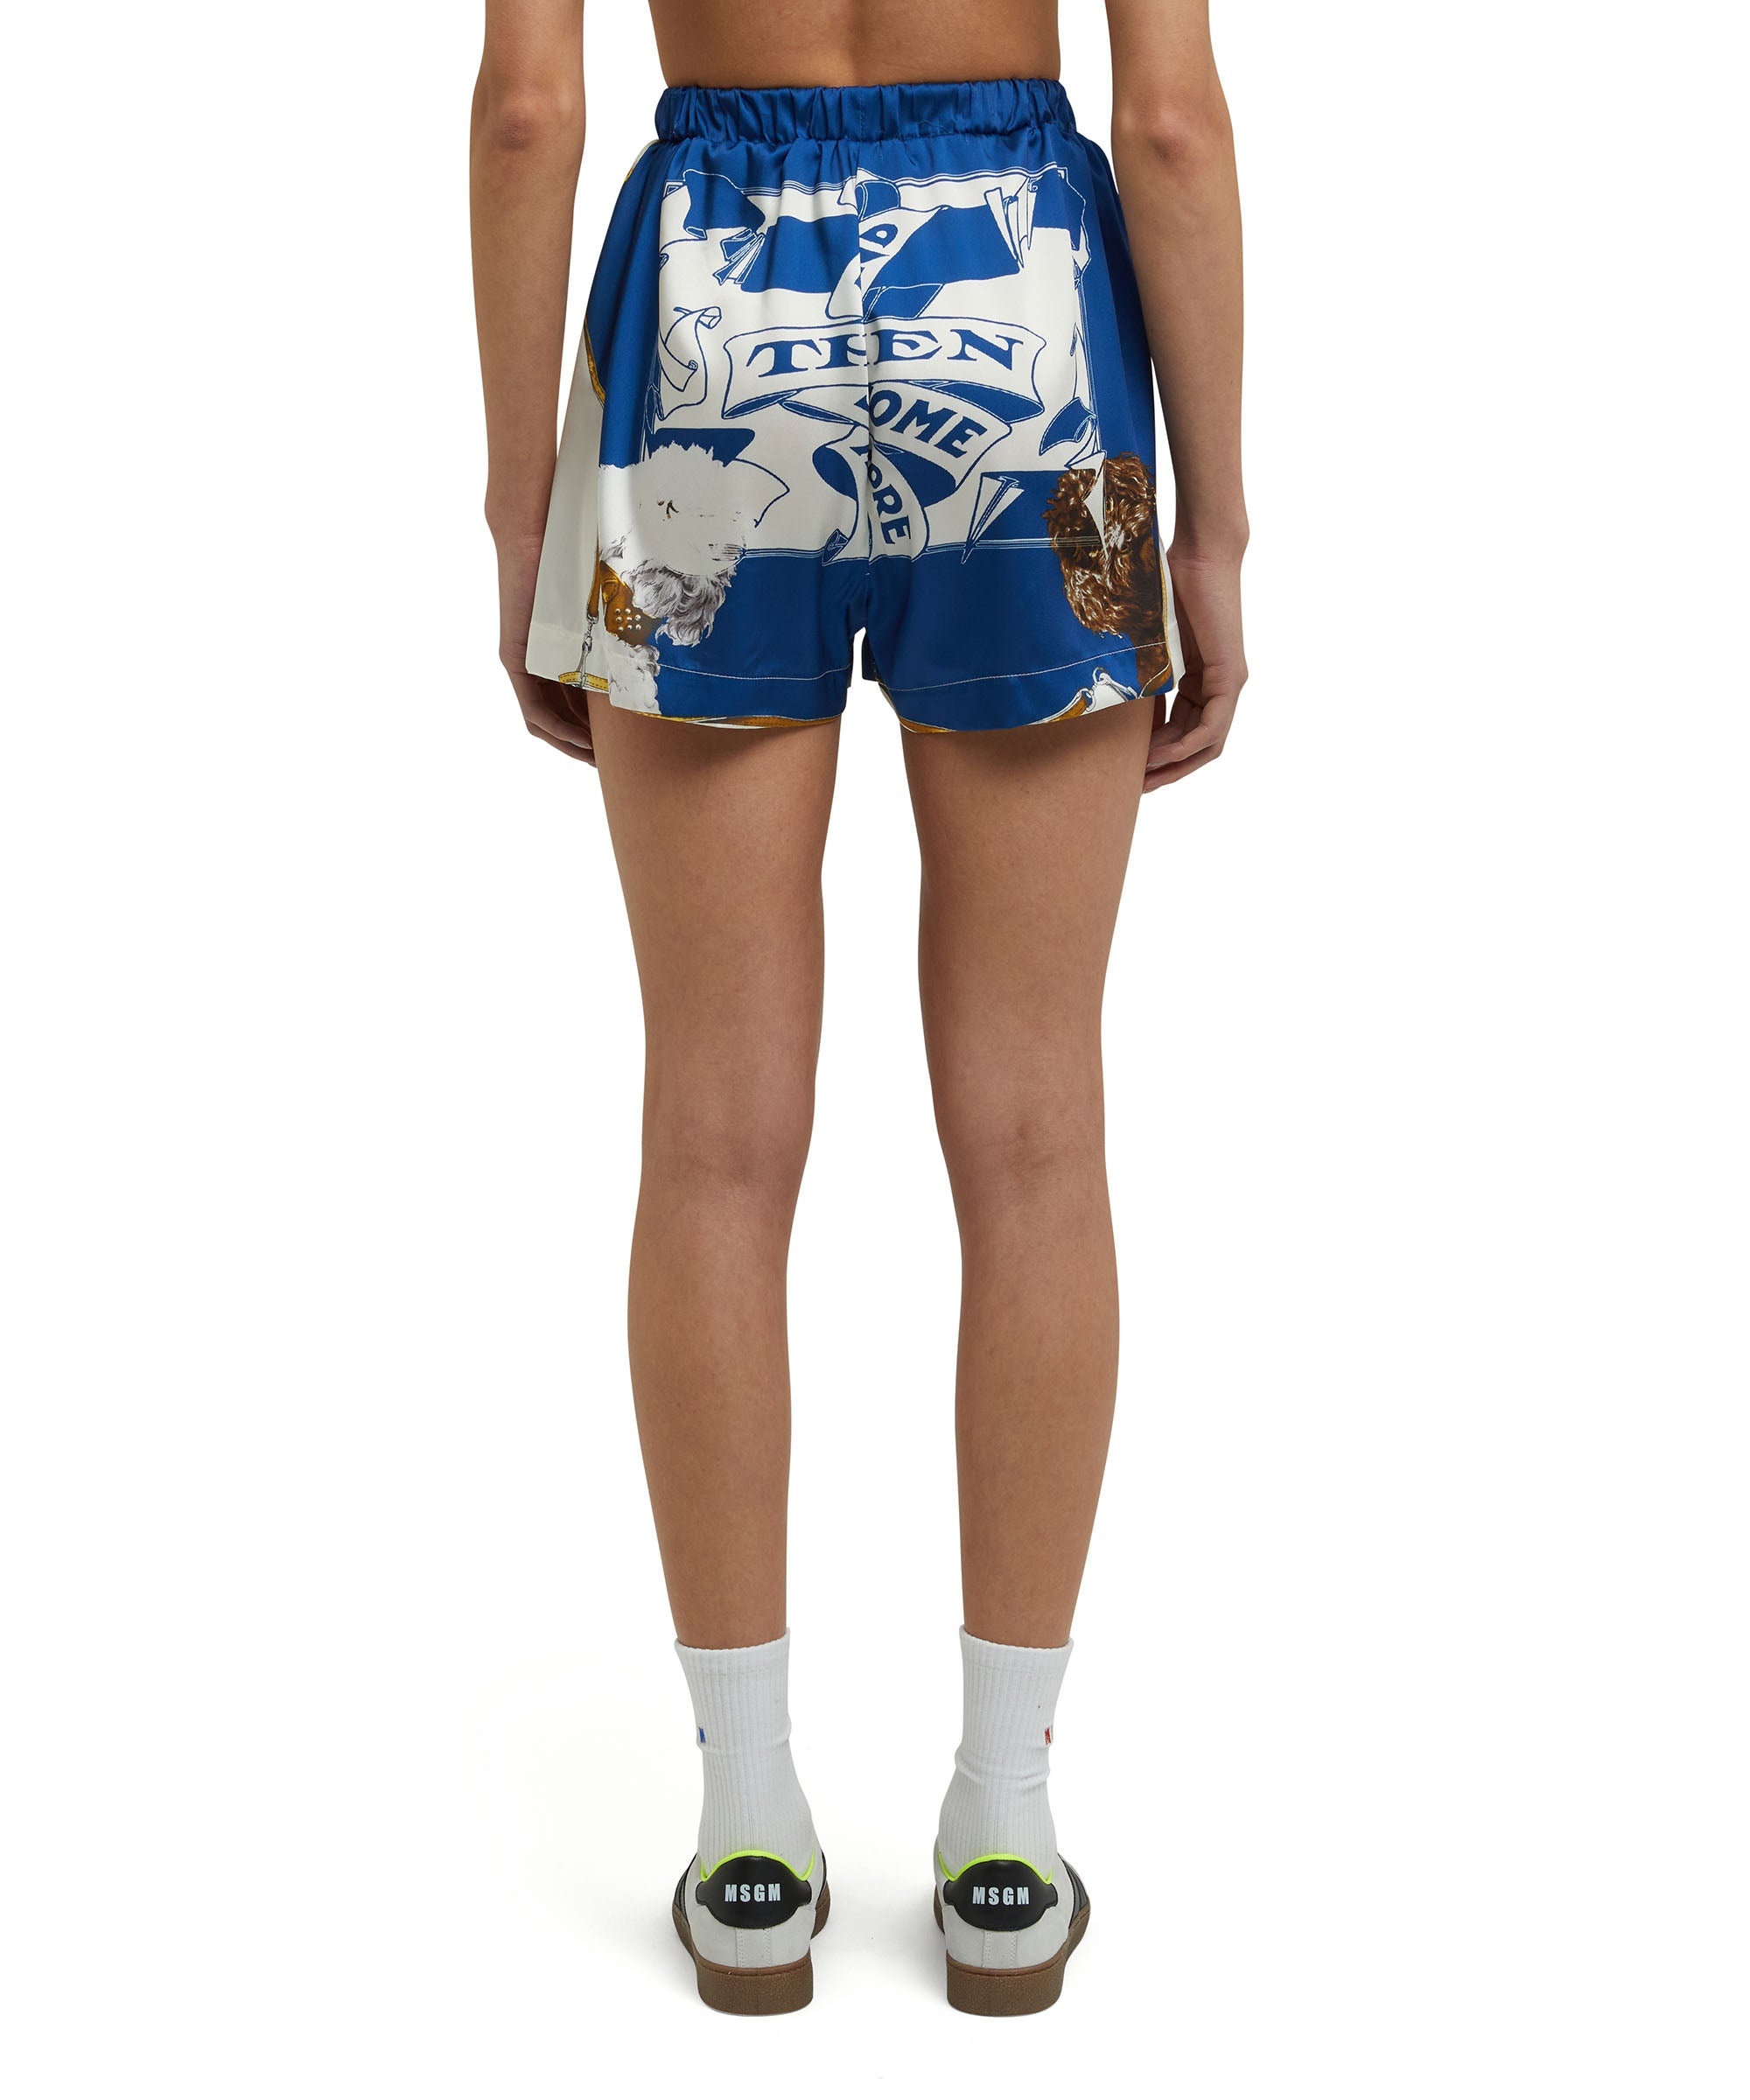 Bermuda shorts from the collaboration of "Lorenza Longhi and MSGM" - 4